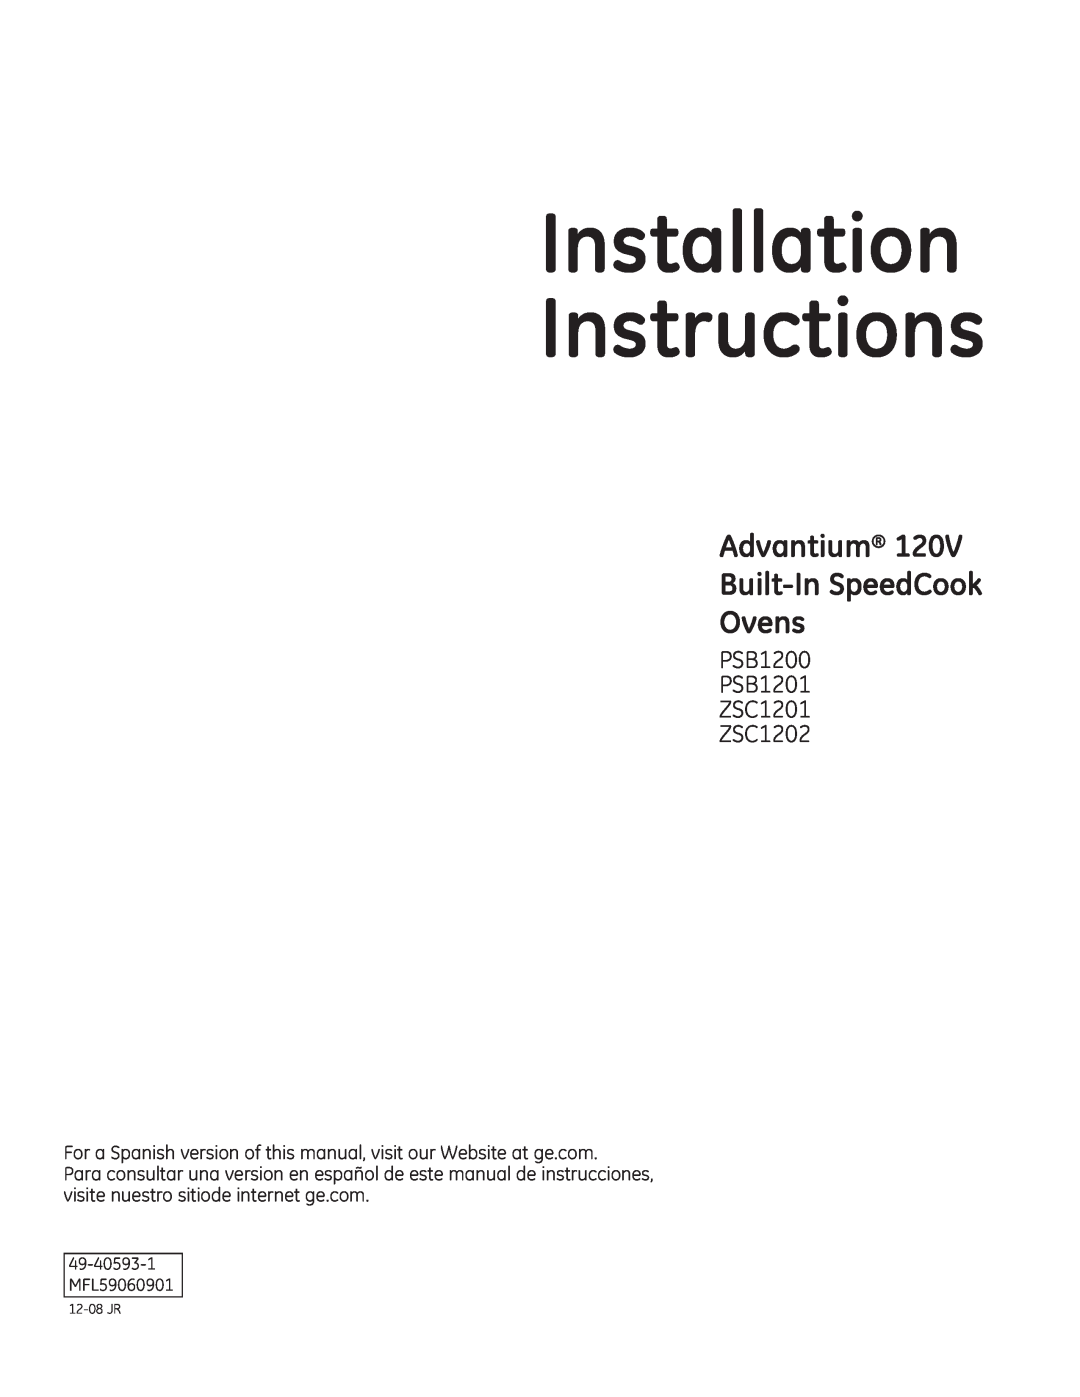 GE ZSC1202SS, ZSC1201SS, PSB1201SS installation instructions Installation Instructions, Advantium Built-InSpeedCook Ovens 